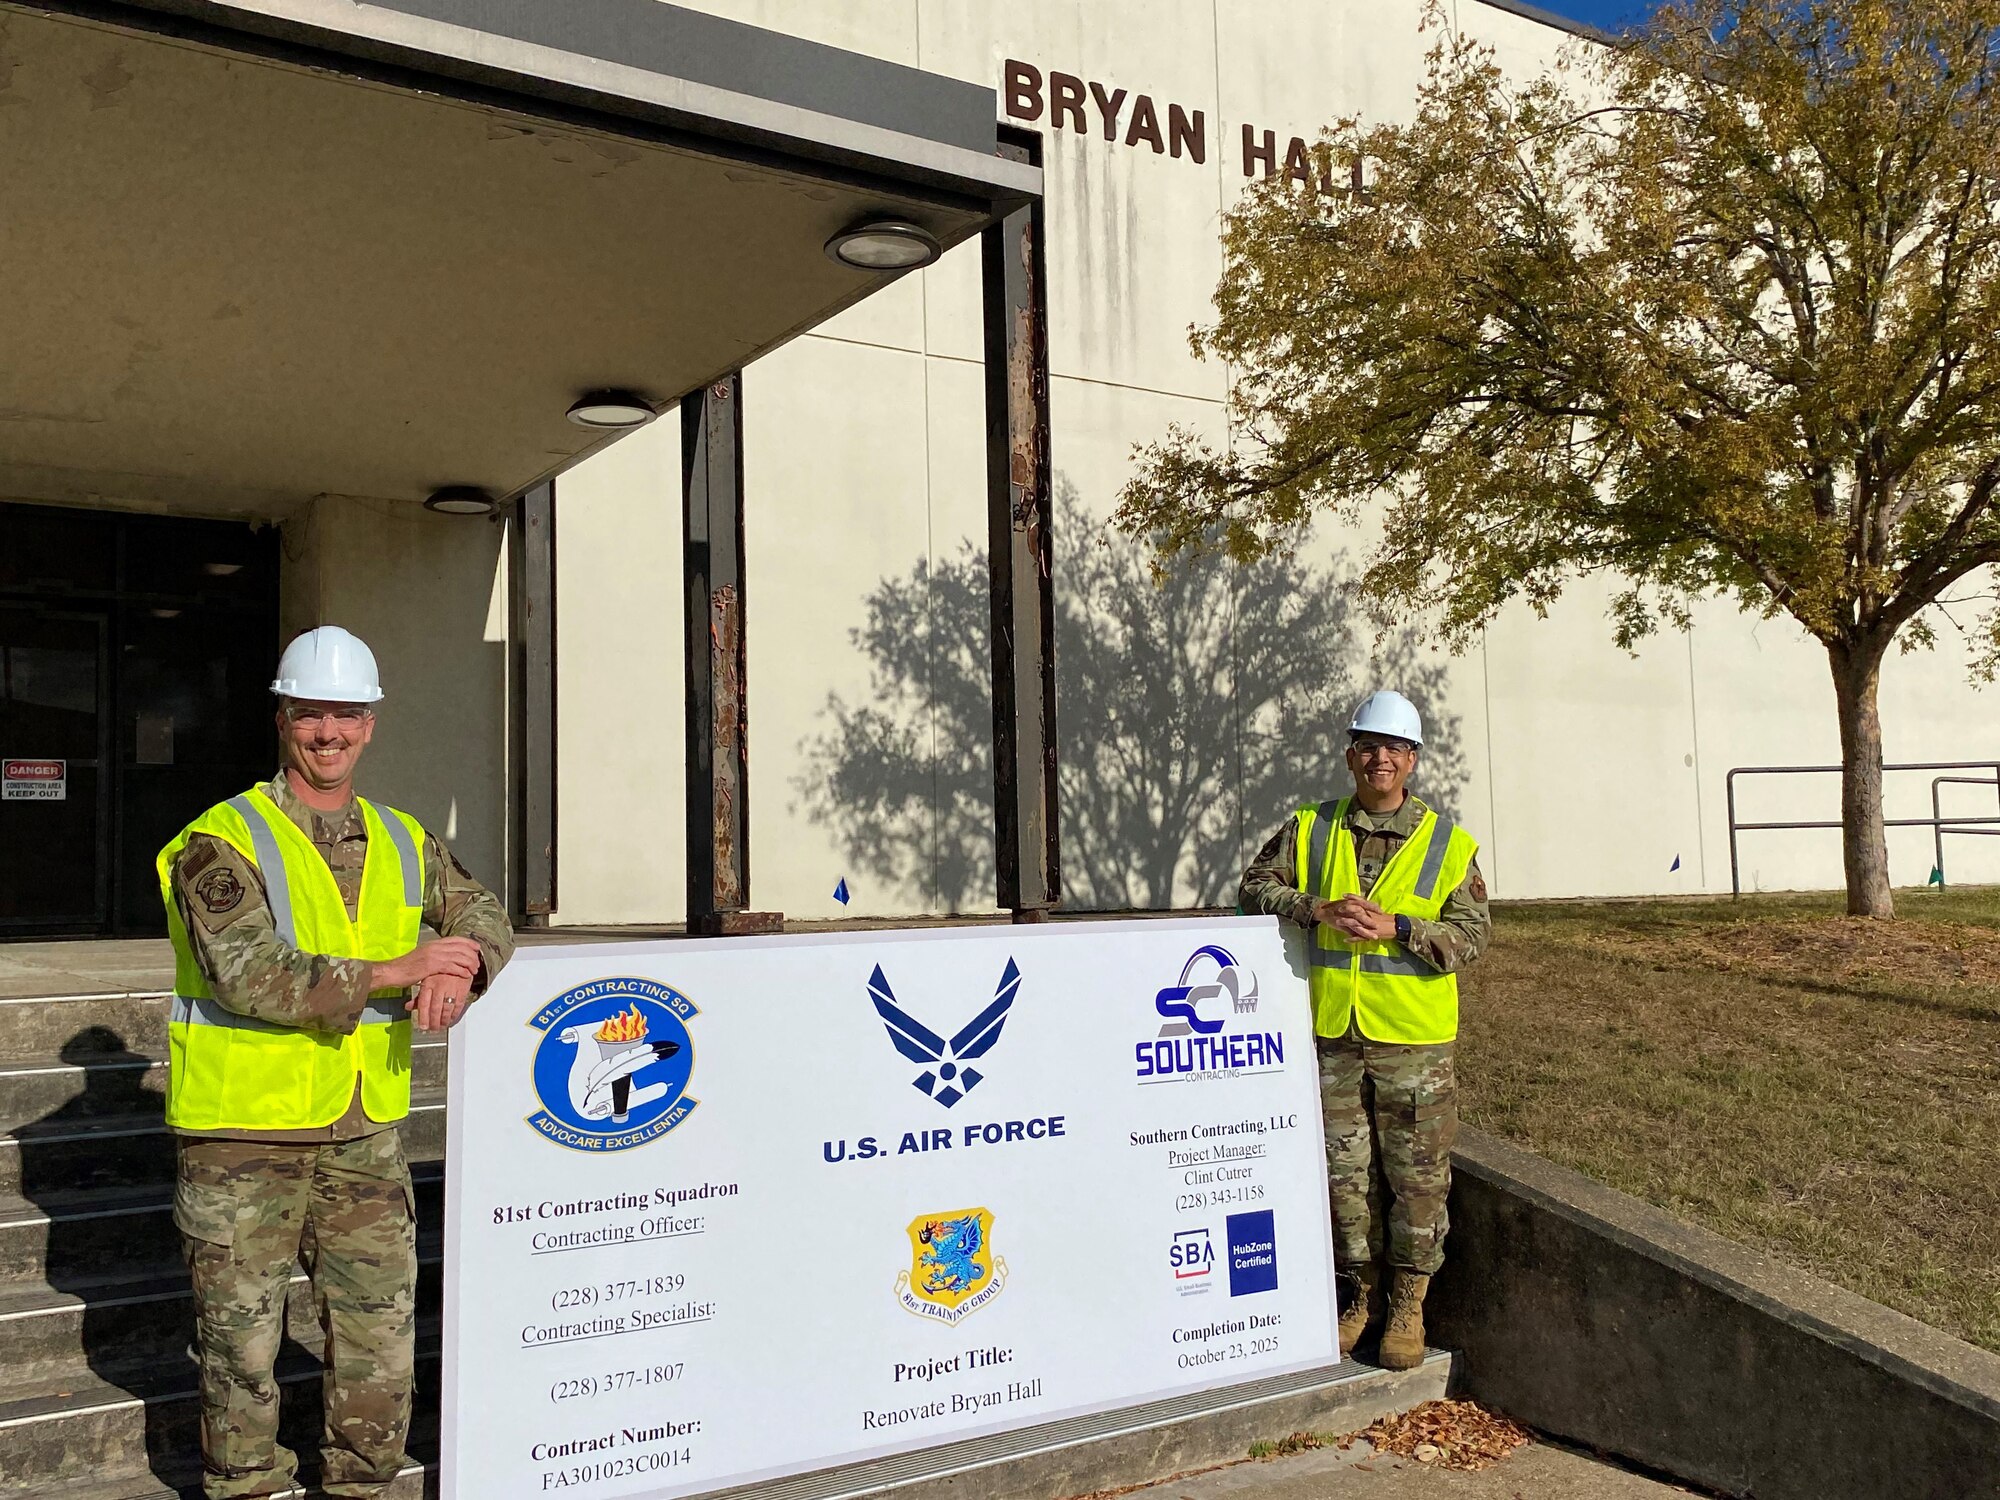 U.S. Air Force Lt. Col. Neftali Herrada, 338th Training Squadron commander, and Master Sgt. Jonathan McCullar, 338th TRS Network System Operations flight chief, pose for a photo in front of Bryan Hall on Keesler Air Force Base, Mississippi, Dec. 6, 2023.